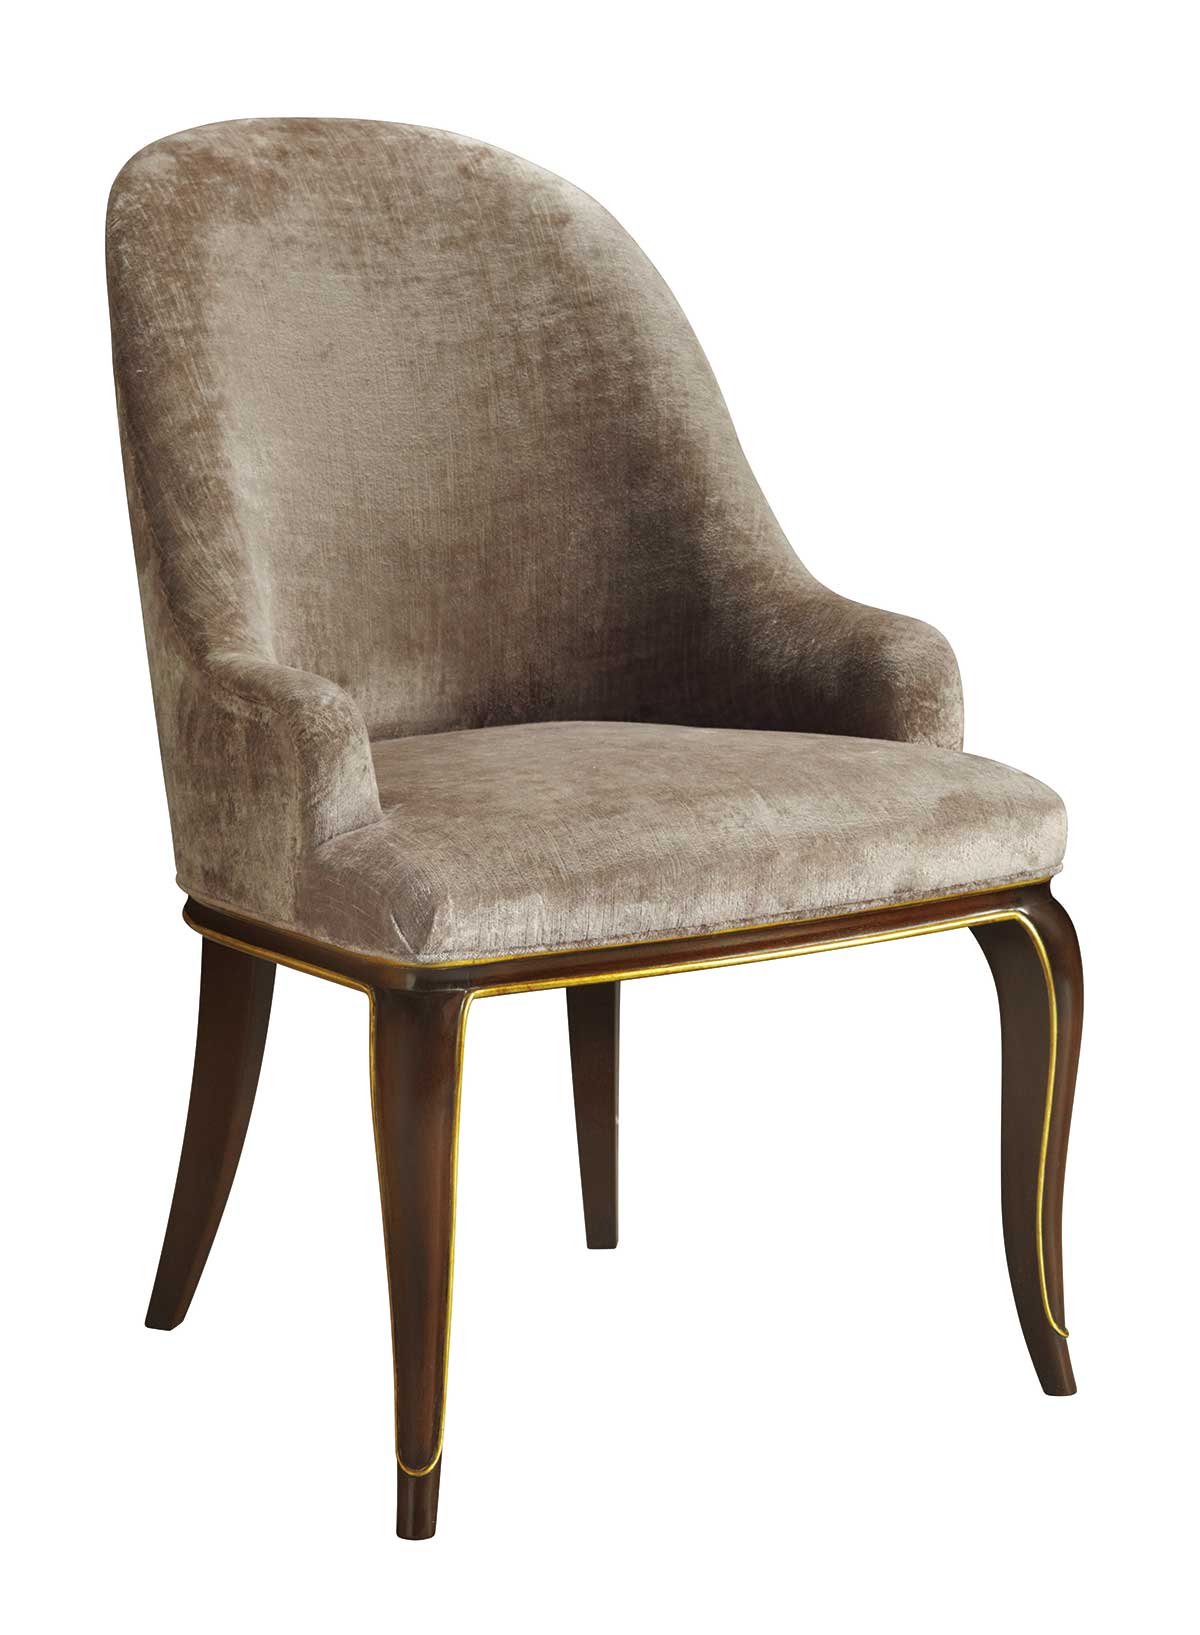 Barbara-Barry-dining-chair